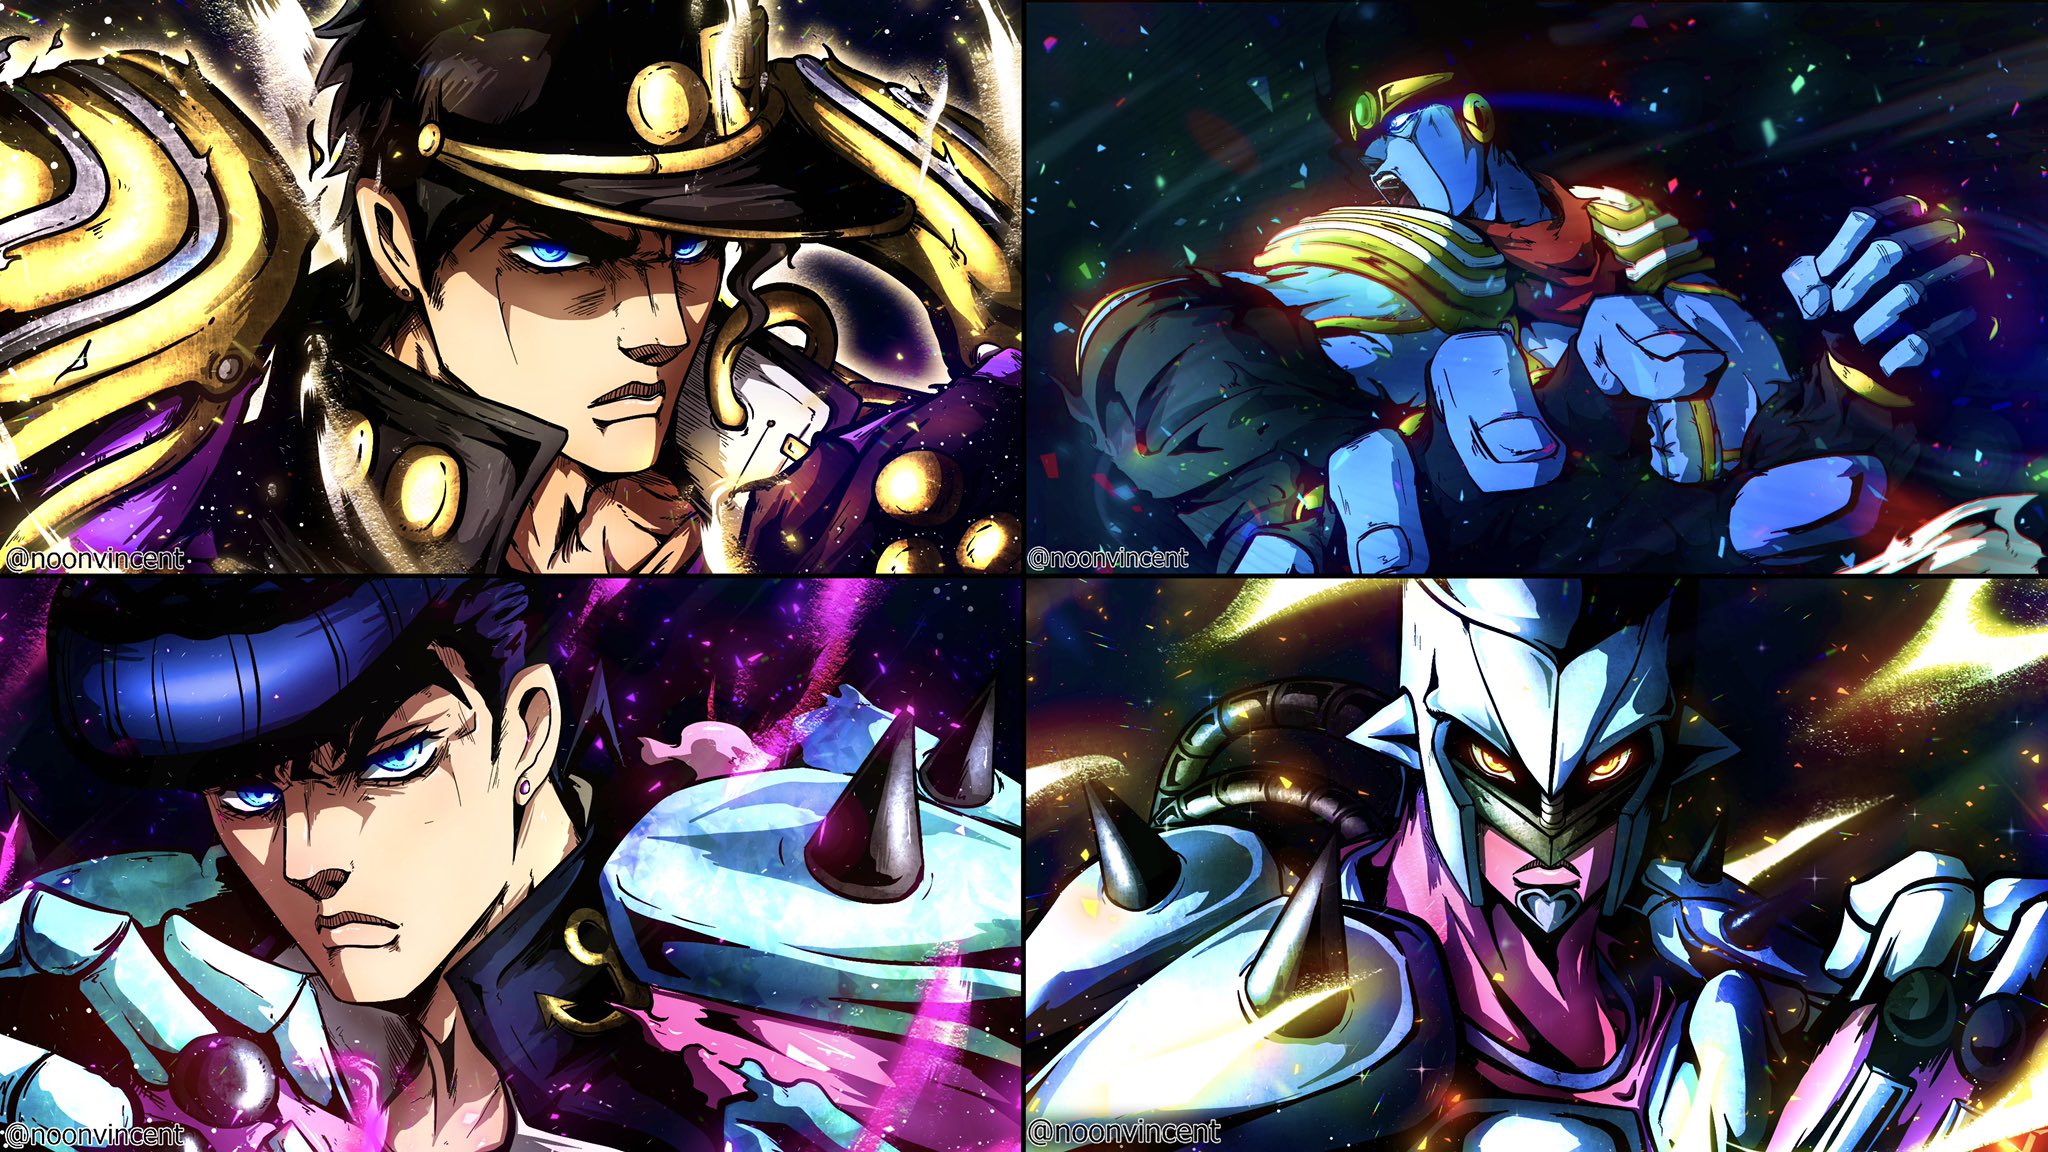 vincentnoon on X: Every Stand in JoJo's Bizarre Adventure⭐️ Anime and  Manga colors Hope you like it !  / X